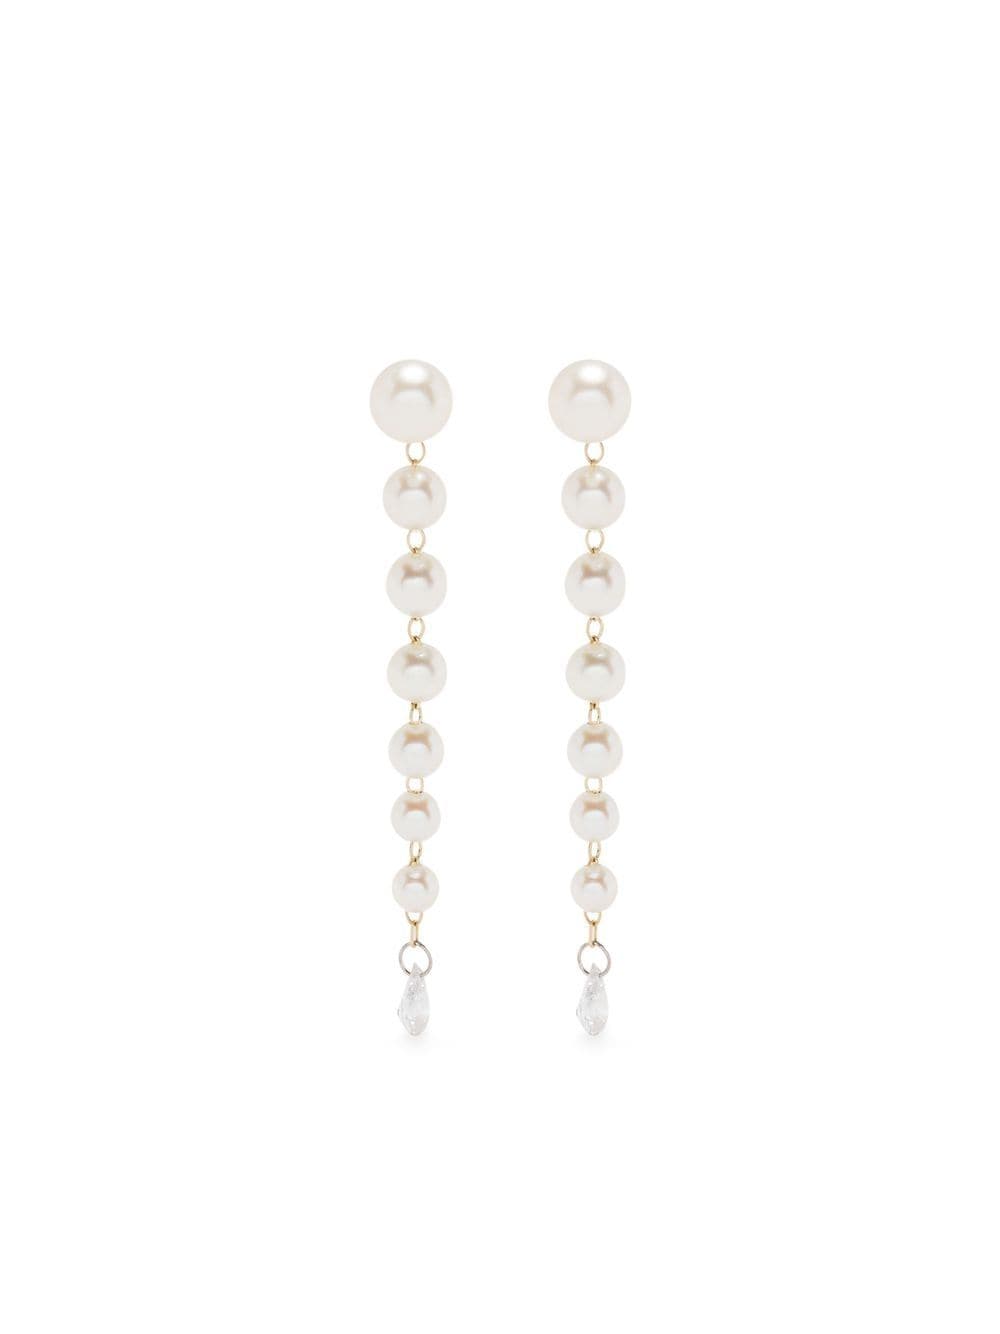 14kt yellow gold Sea of Beauty pearl and diamond earrings